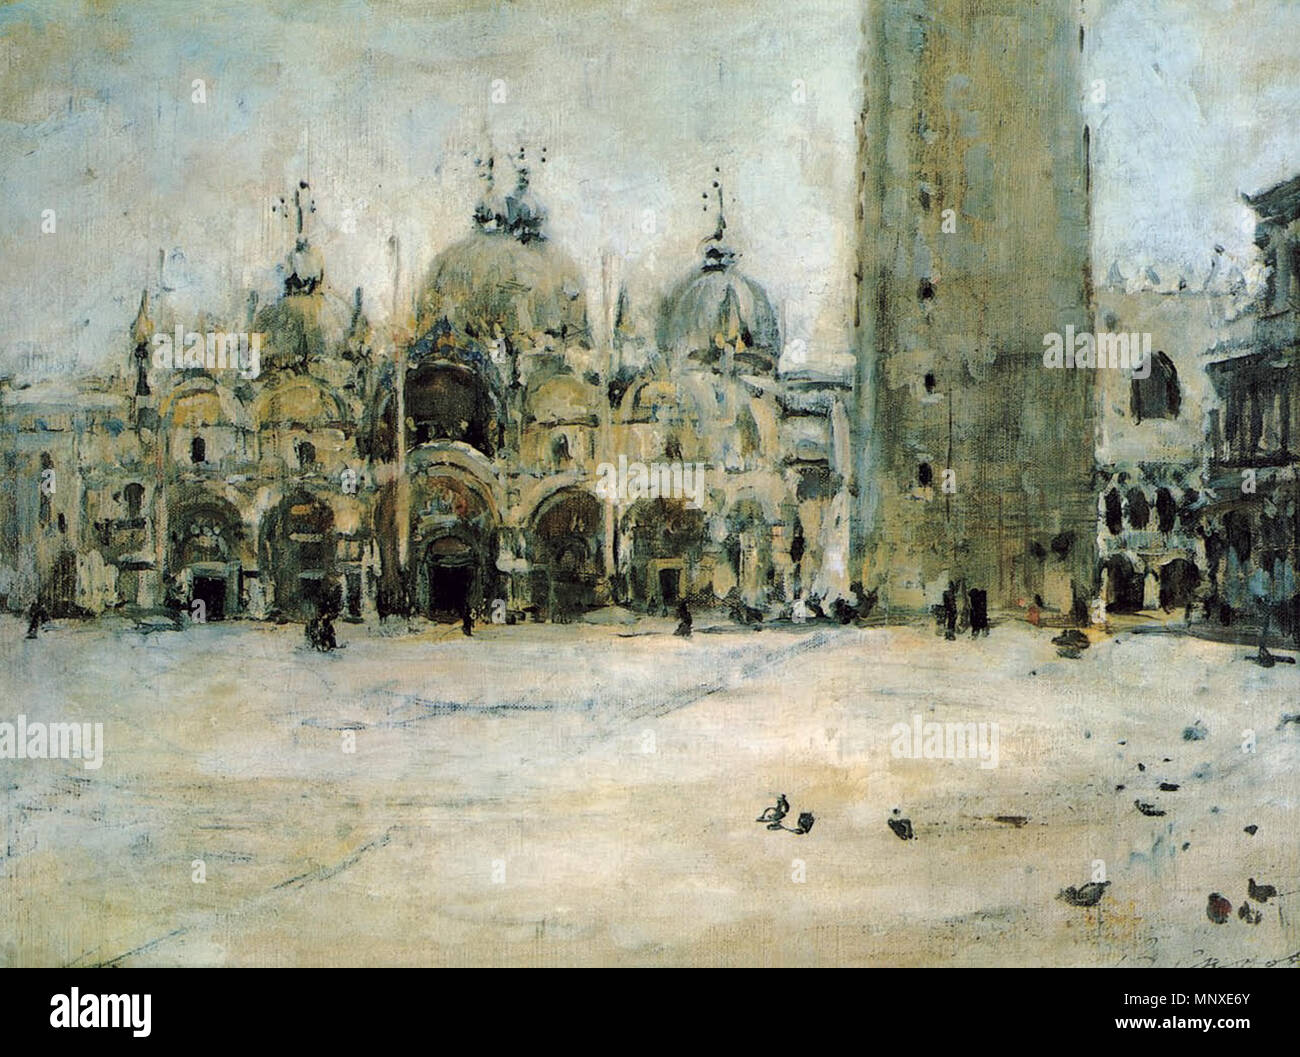 . St. Mark Plaza in Venice. Study. 1887. Oil on canvas. The Tretyakov Gallery, Moscow, Russia     Valentin Serov  (1865–1911)     Alternative names Russian: Валентин Александрович Серов  Description Russian painter  Date of birth/death 19 January 1865 (7 January 1865 in Julian calendar) 22 November 1911 (5 December 1911 in Julian calendar)  Location of birth/death Saint Petersburg Moscow  Work location Netherlands (1885); Belgium (1885); Germany (1855); Italy (1887); Paris (1889); Italy (1904); Greece (1907); Italy (1910); Paris (1910); Munich (1872 - 1873); Paris (1874 - 1875); Moscow (1878 - Stock Photo